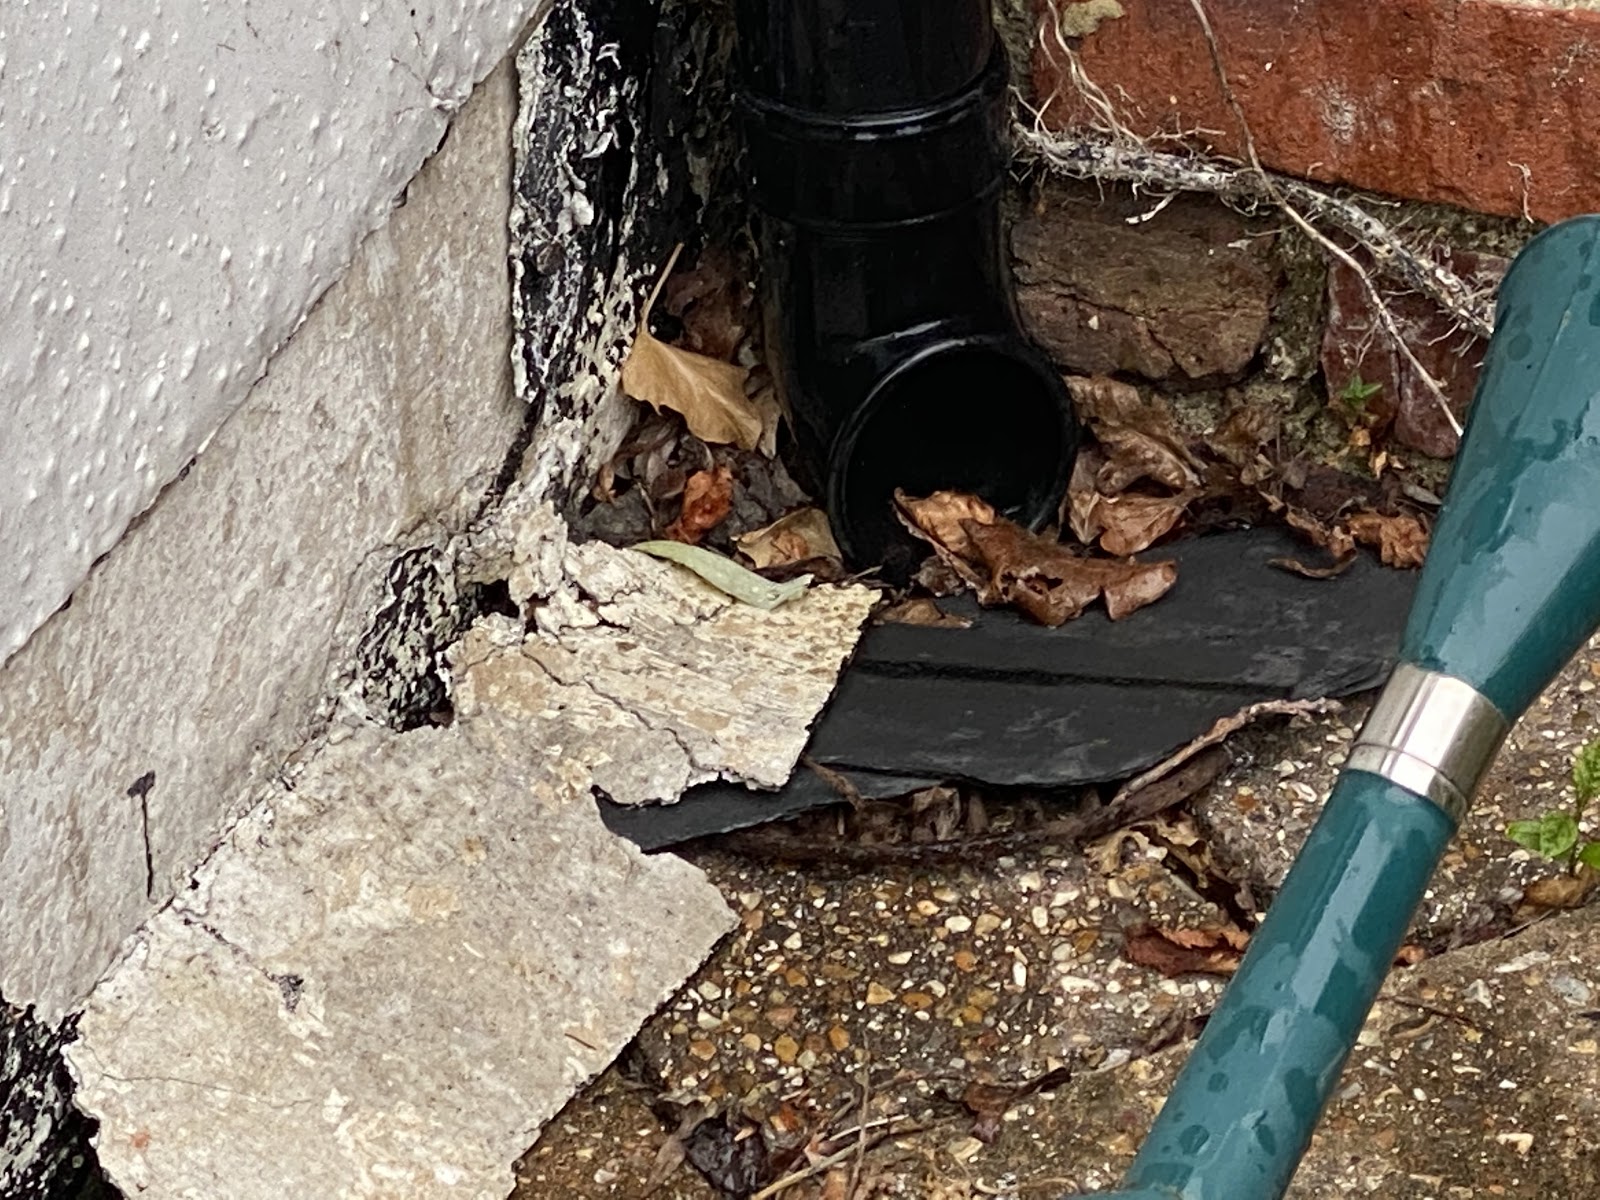 This image shows a down pipe pouring onto the ground next to the house foundations.